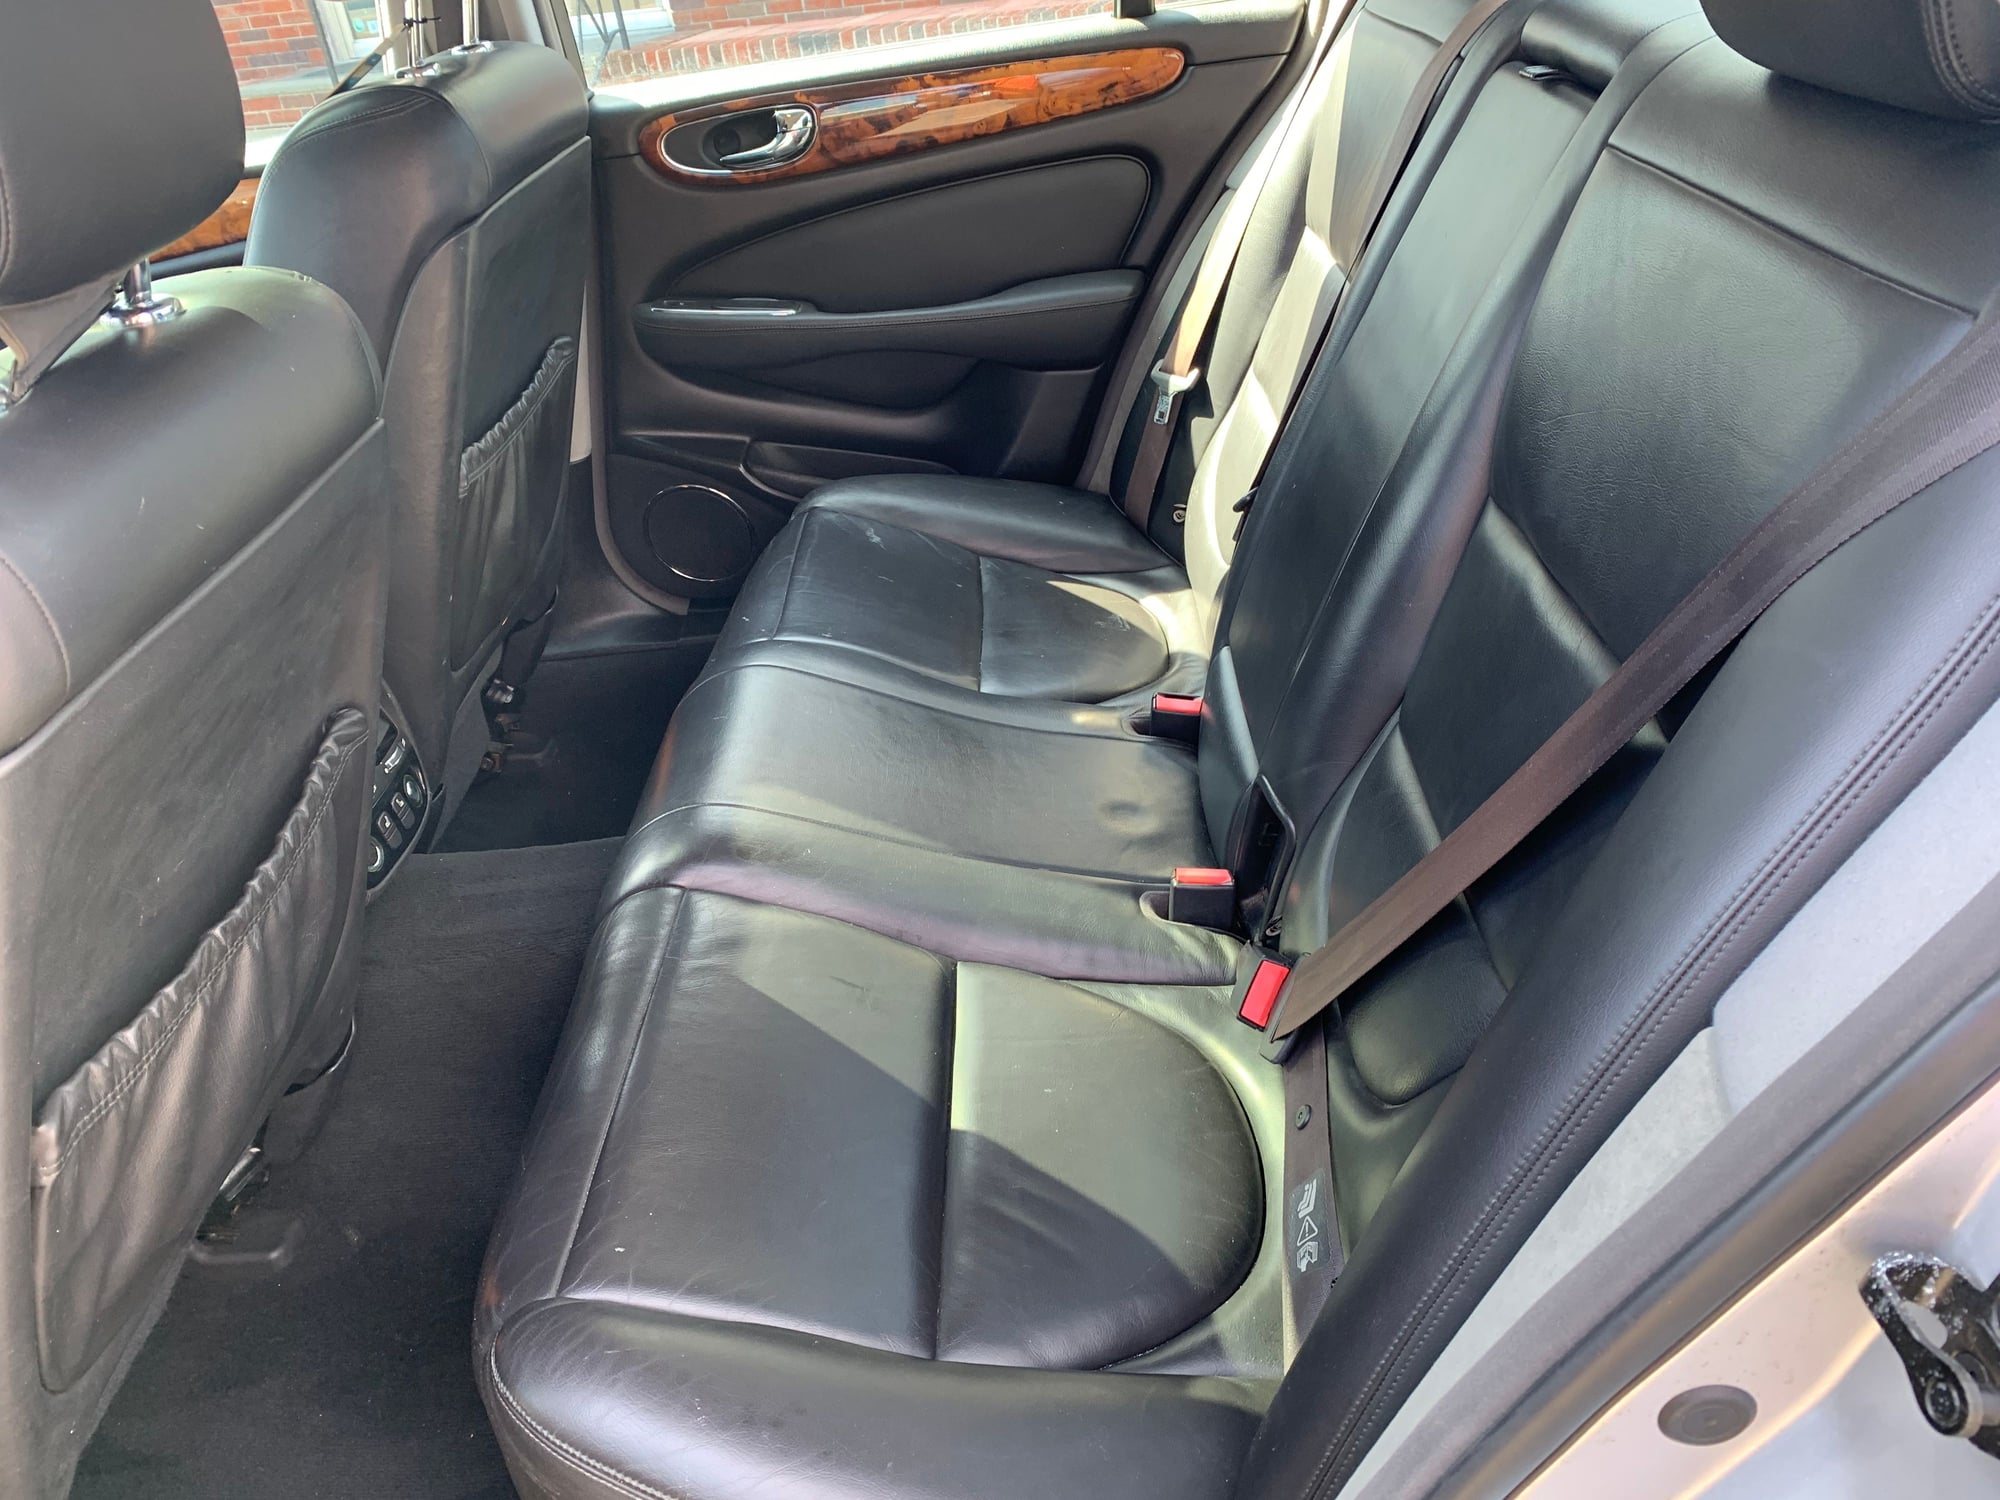 2004 Jaguar XJ8 - Nice, Clean and In Excellent Condition - Used - VIN SAJEA71C34SG11188 - 88,001 Miles - 8 cyl - 2WD - Automatic - Sedan - Silver - Hawthorne, NJ 07506, United States